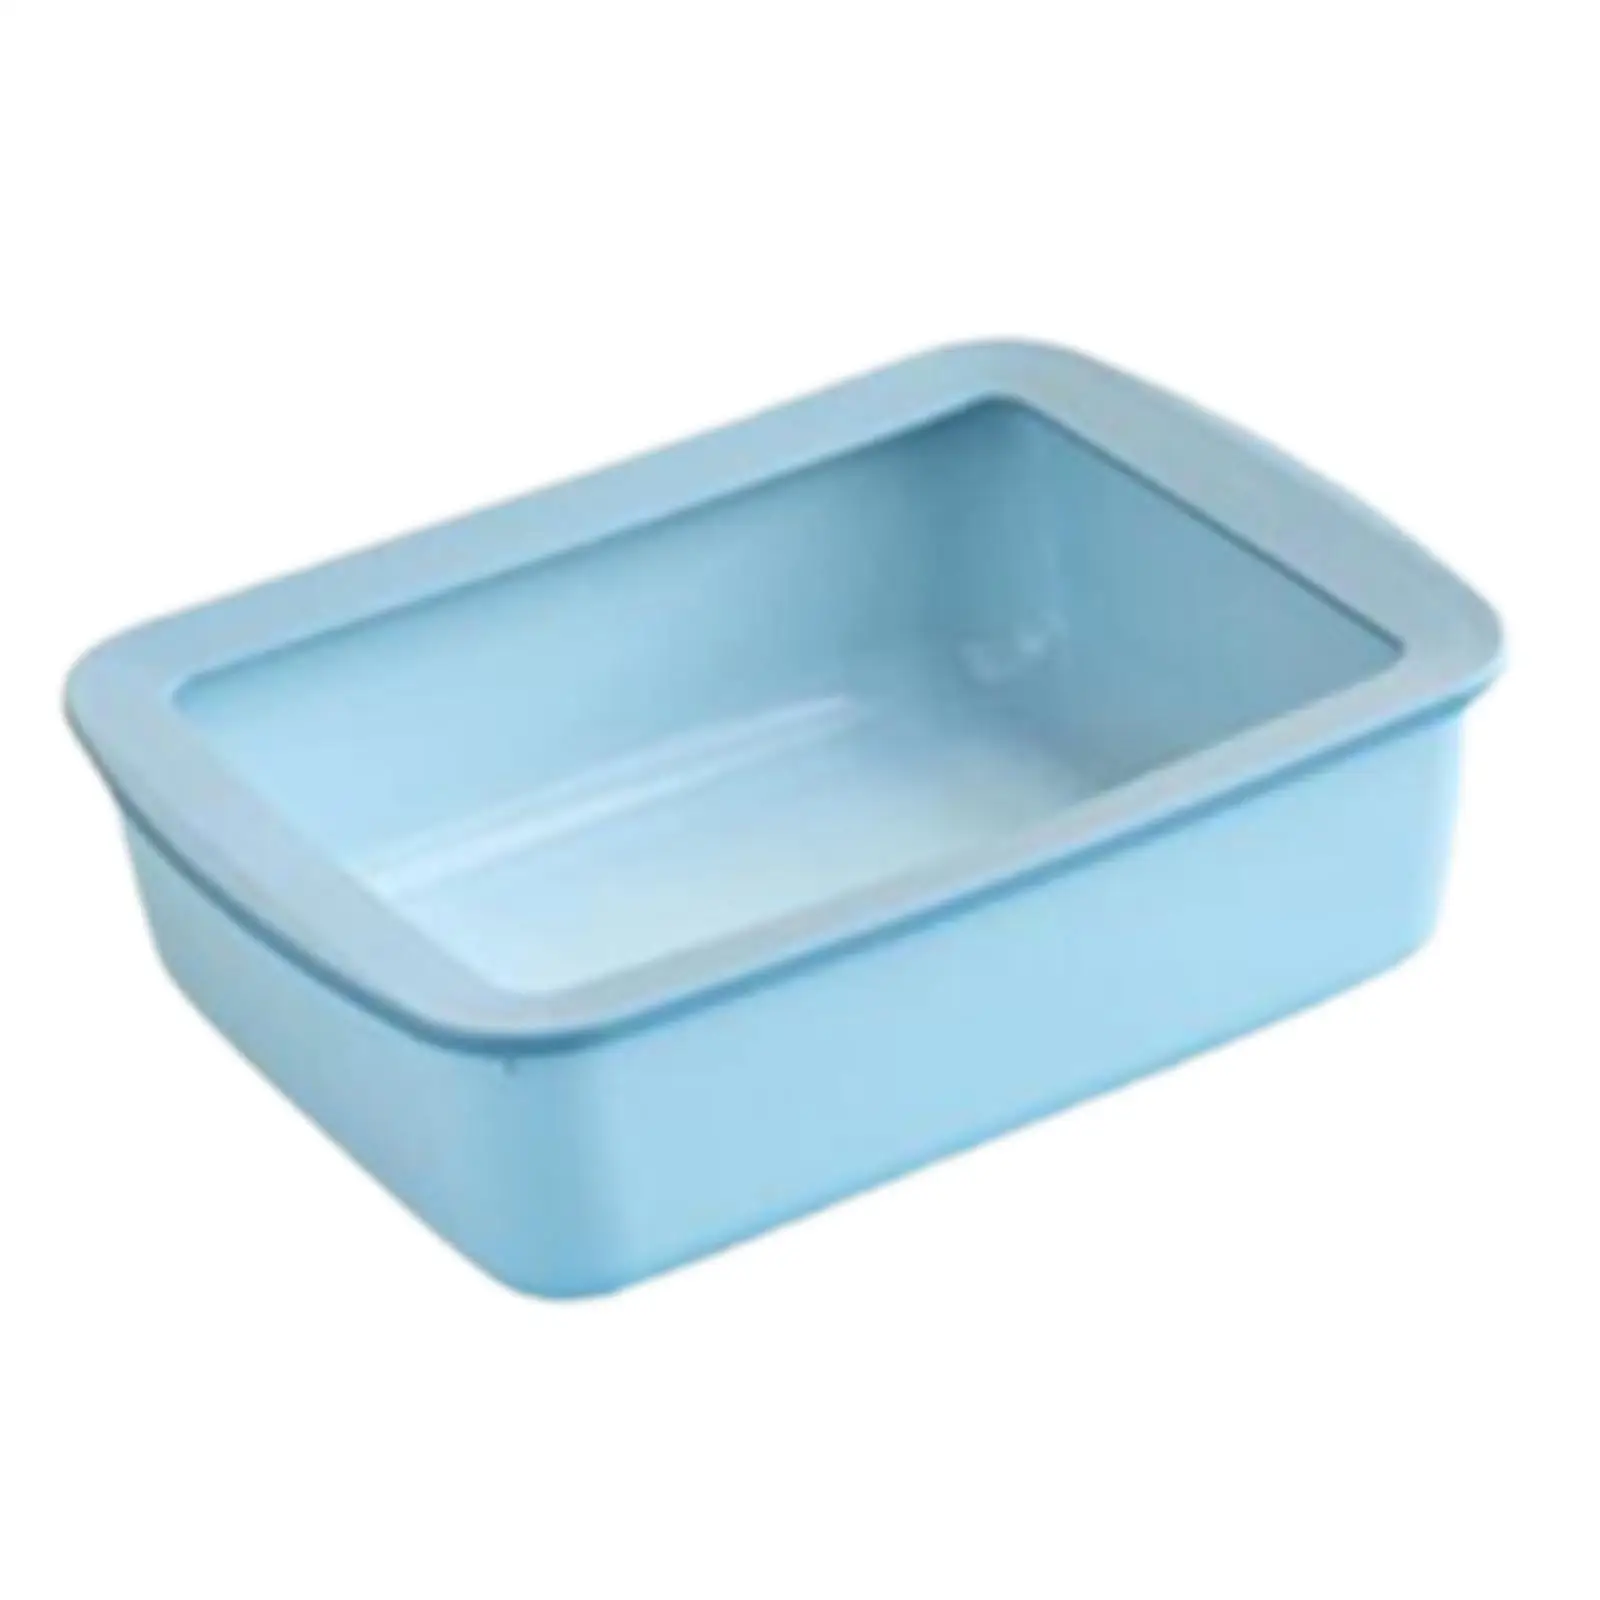 Cat Litter Box Indoor Cats Cat Litter Toilet Easy to Clean Bedpan Semi Open Pets Litter Tray Cat Sand Box for Pet Accessories